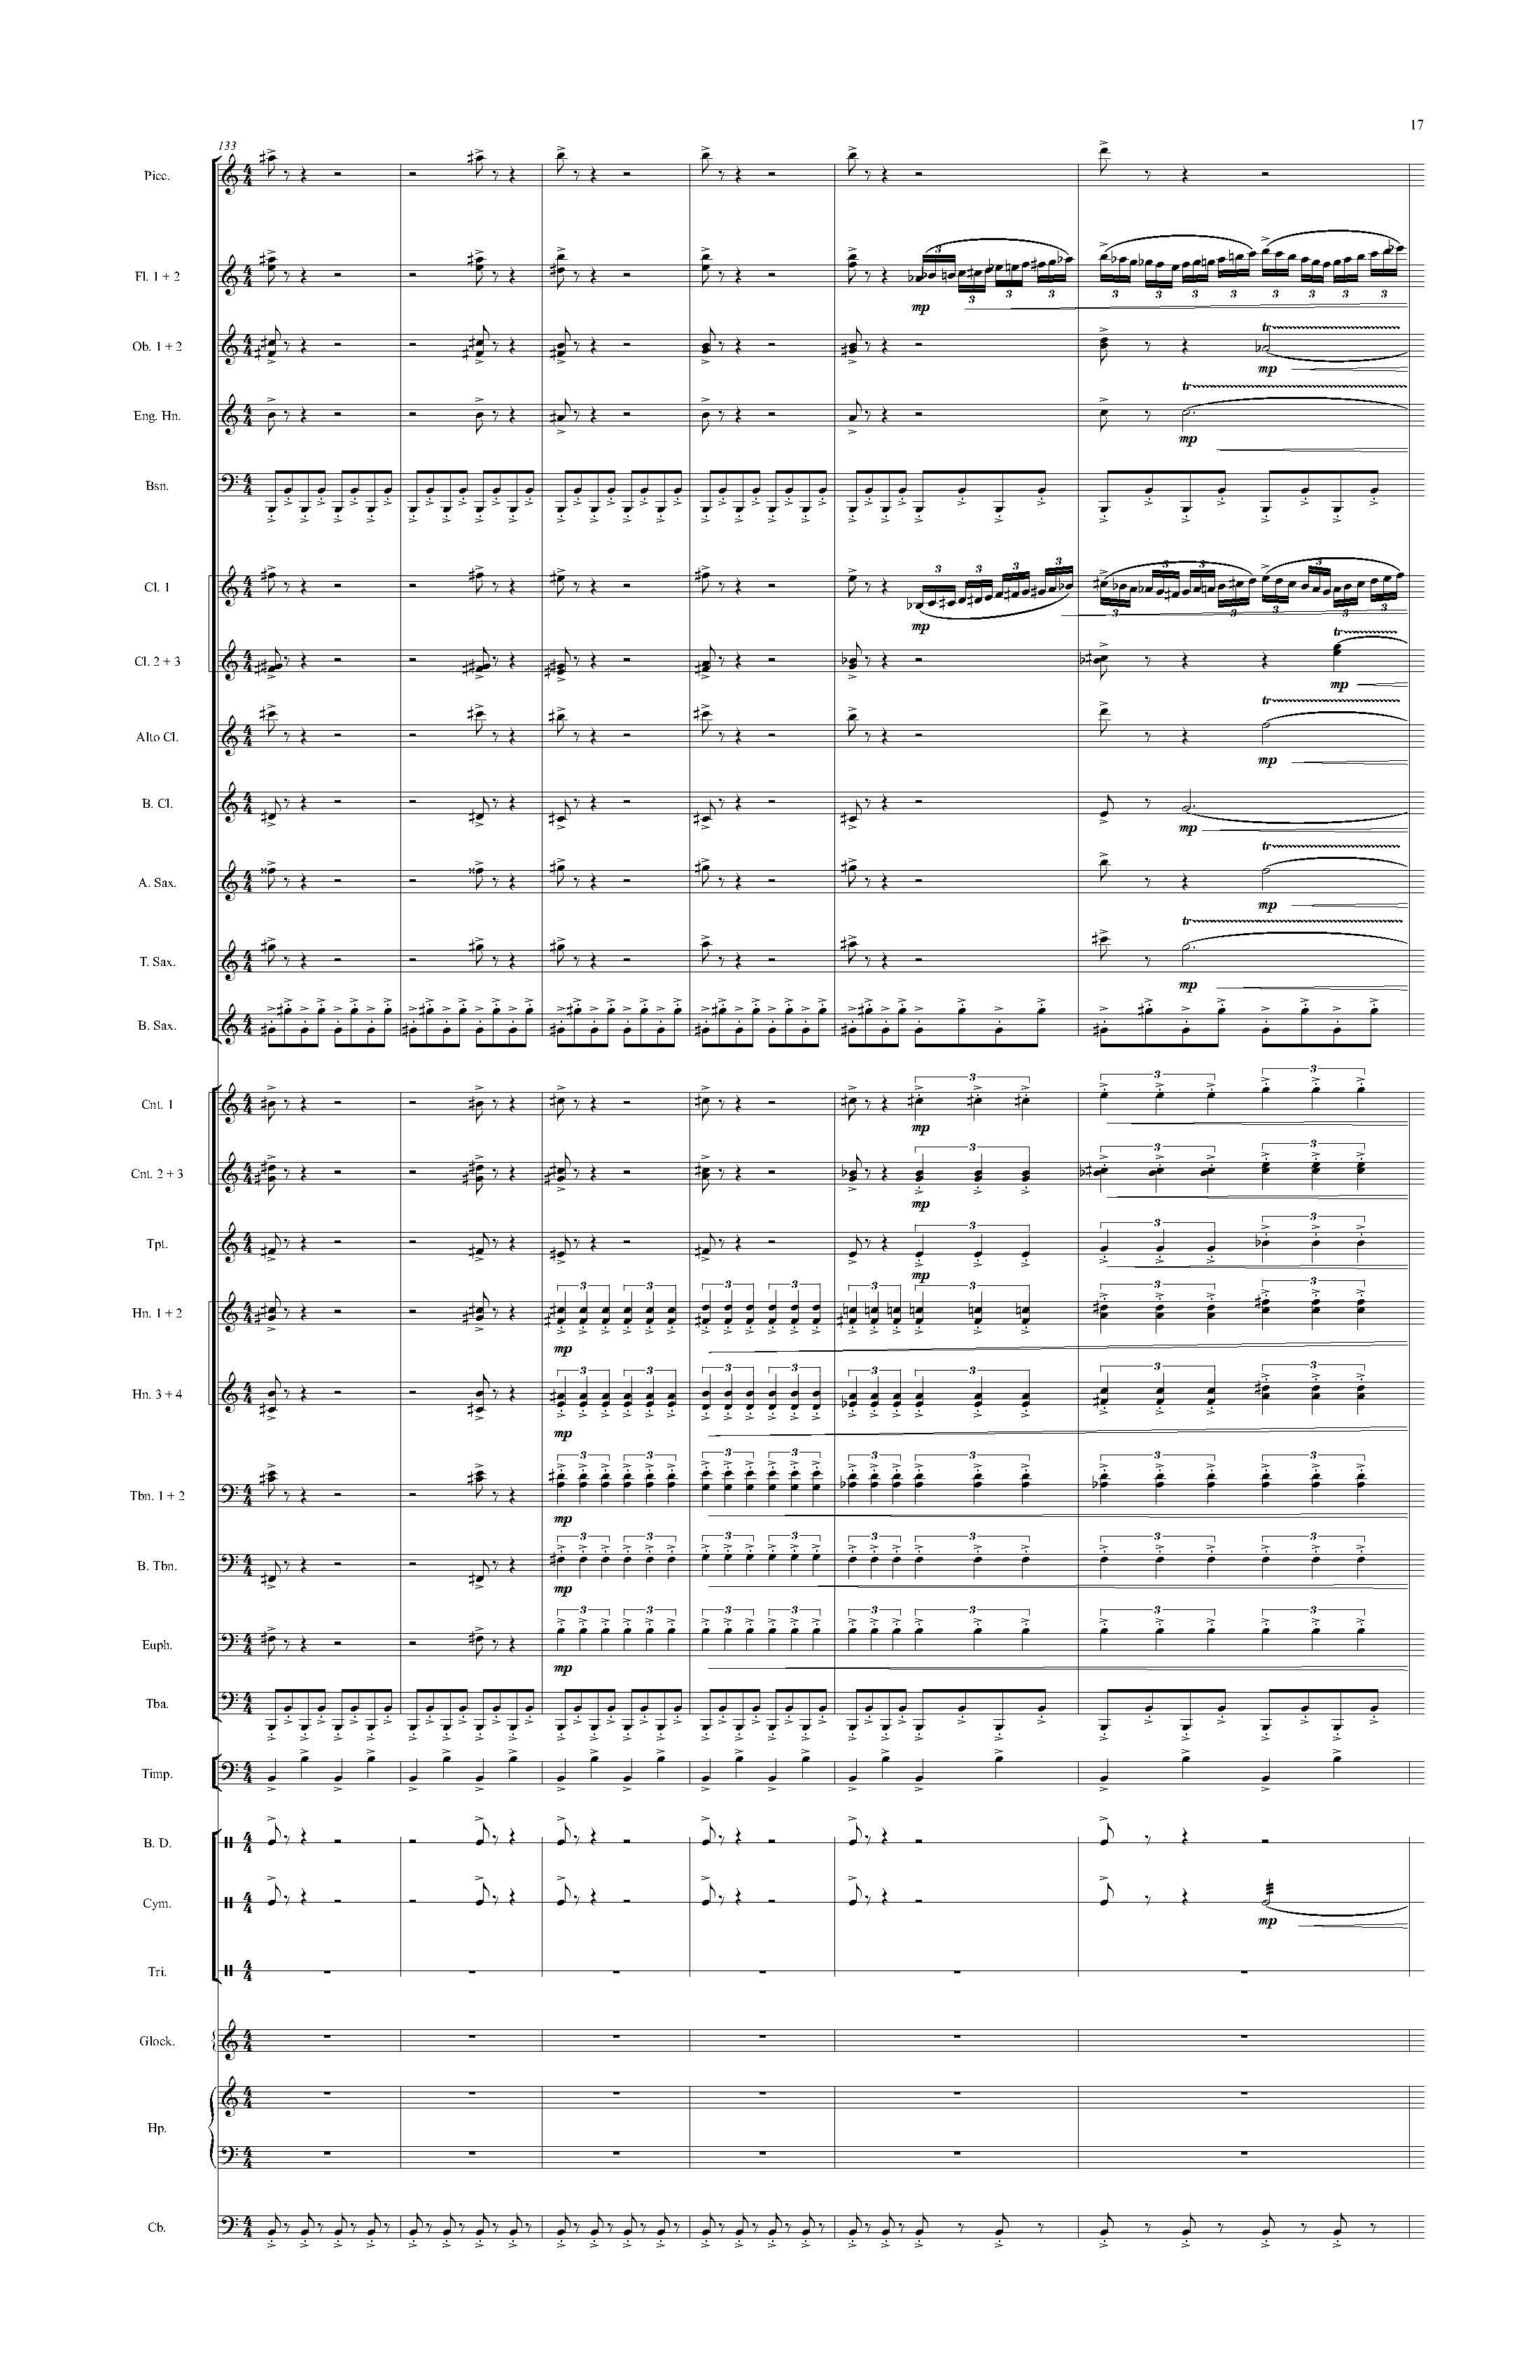 Psyche - Complete Score_Page_23.jpg